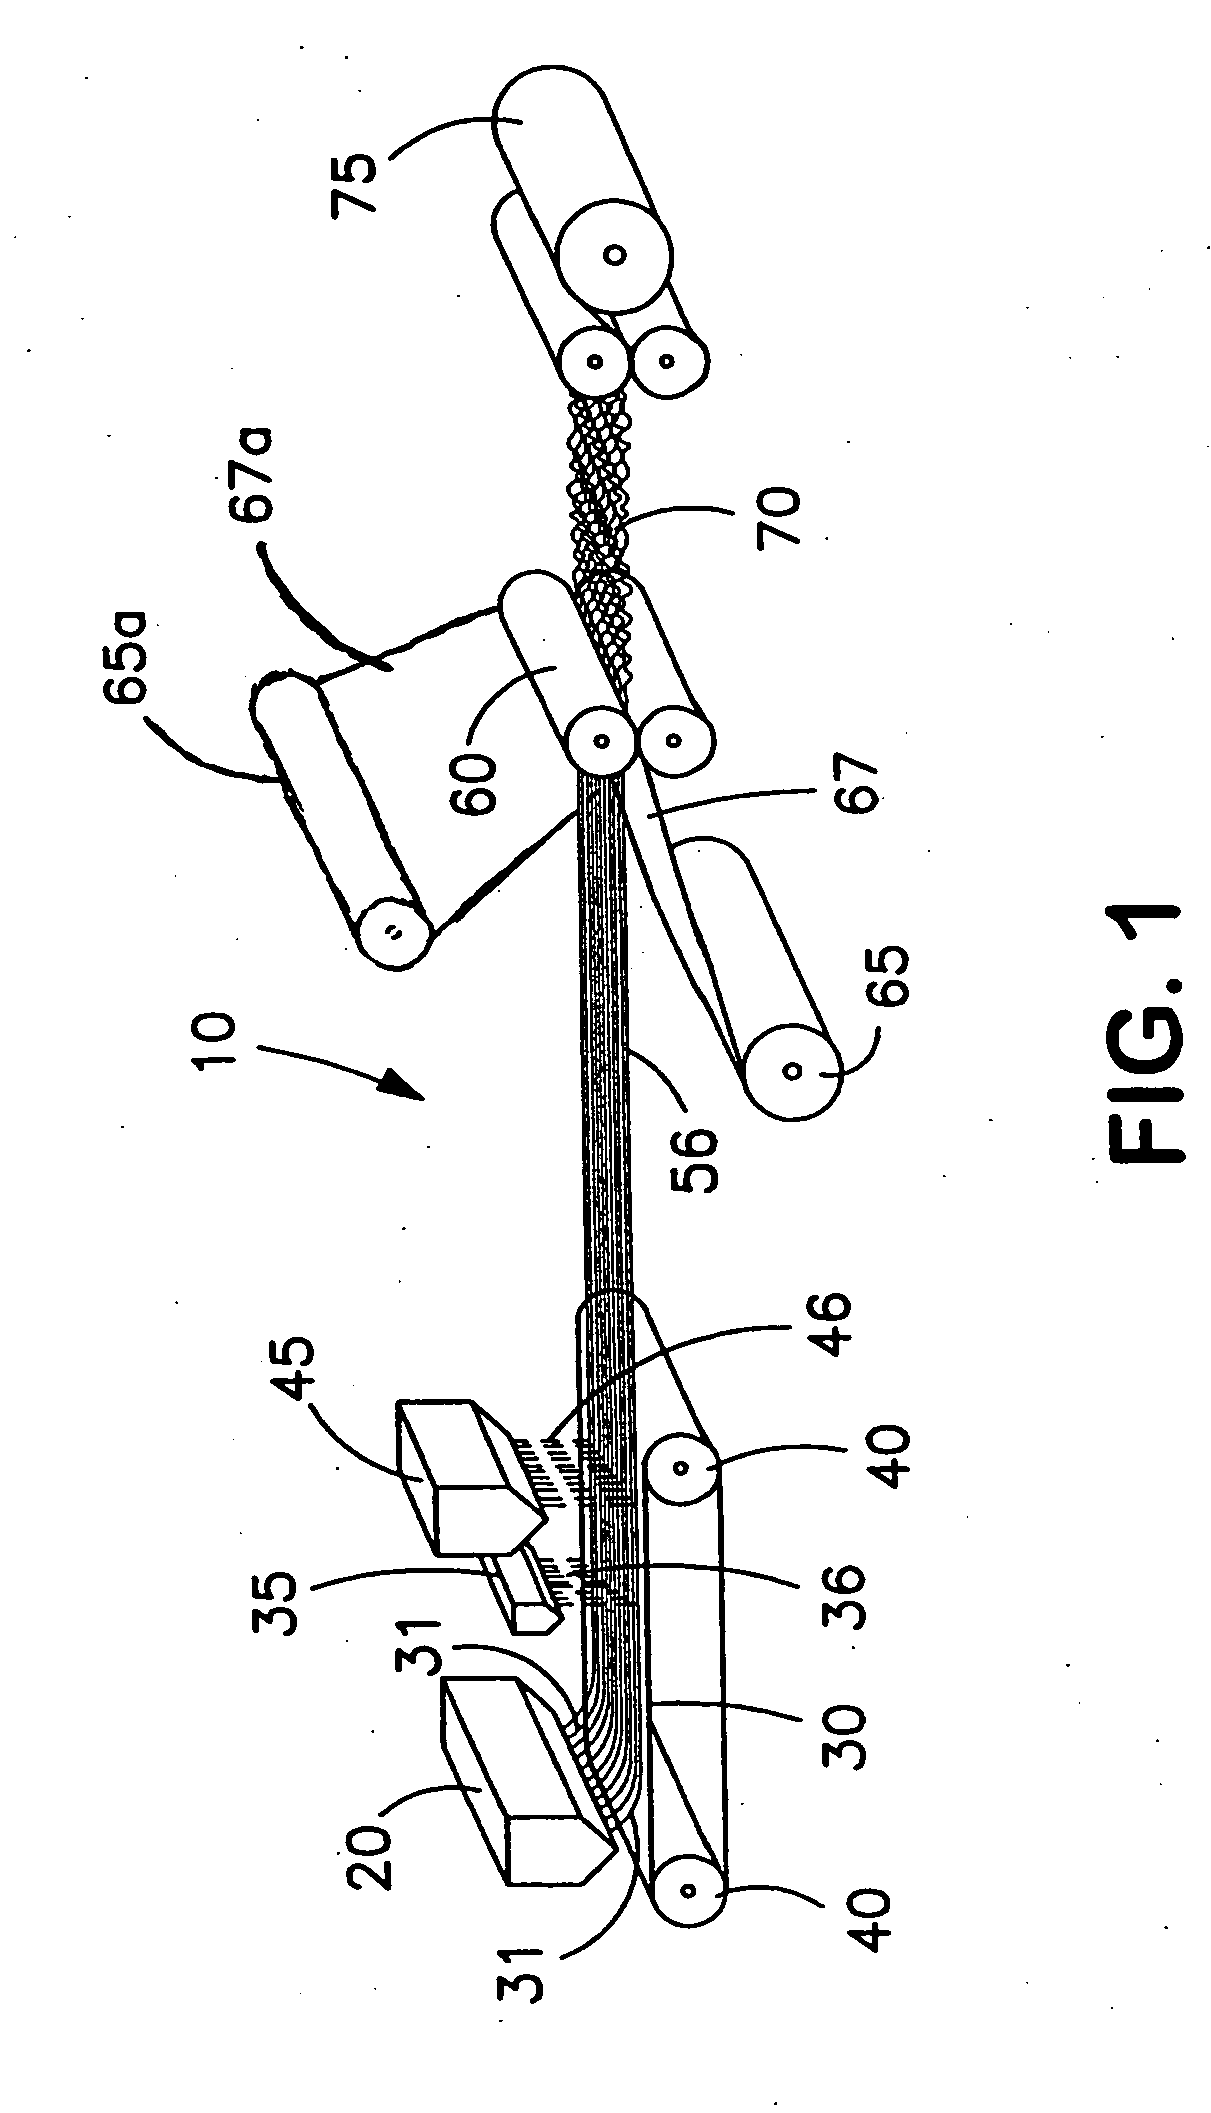 Latent elastic articles and methods of making thereof